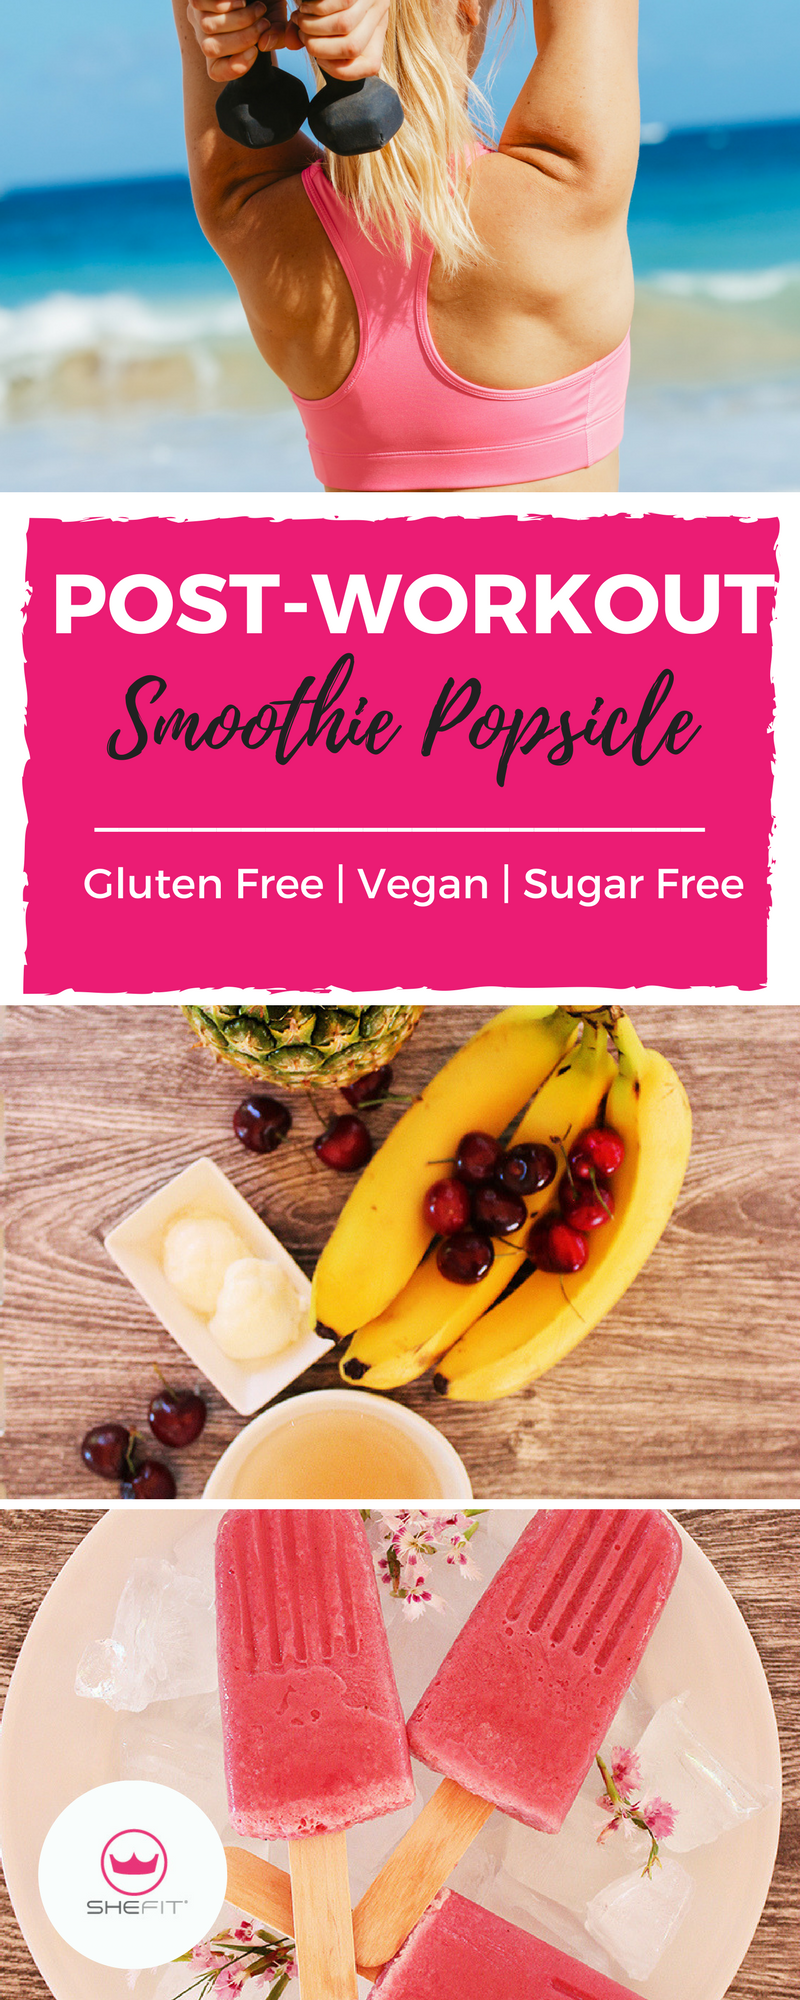 Easy DIY Homemade Greek Yogurt Smoothie Popsicle Recipes for Weight Loss : There’s no better way to cool down post-workout than with a gluten free popsicle filled with fruity ingredients to help you in your muscle recovery. Vegan, anti-inflammatory, and sugar-free! 